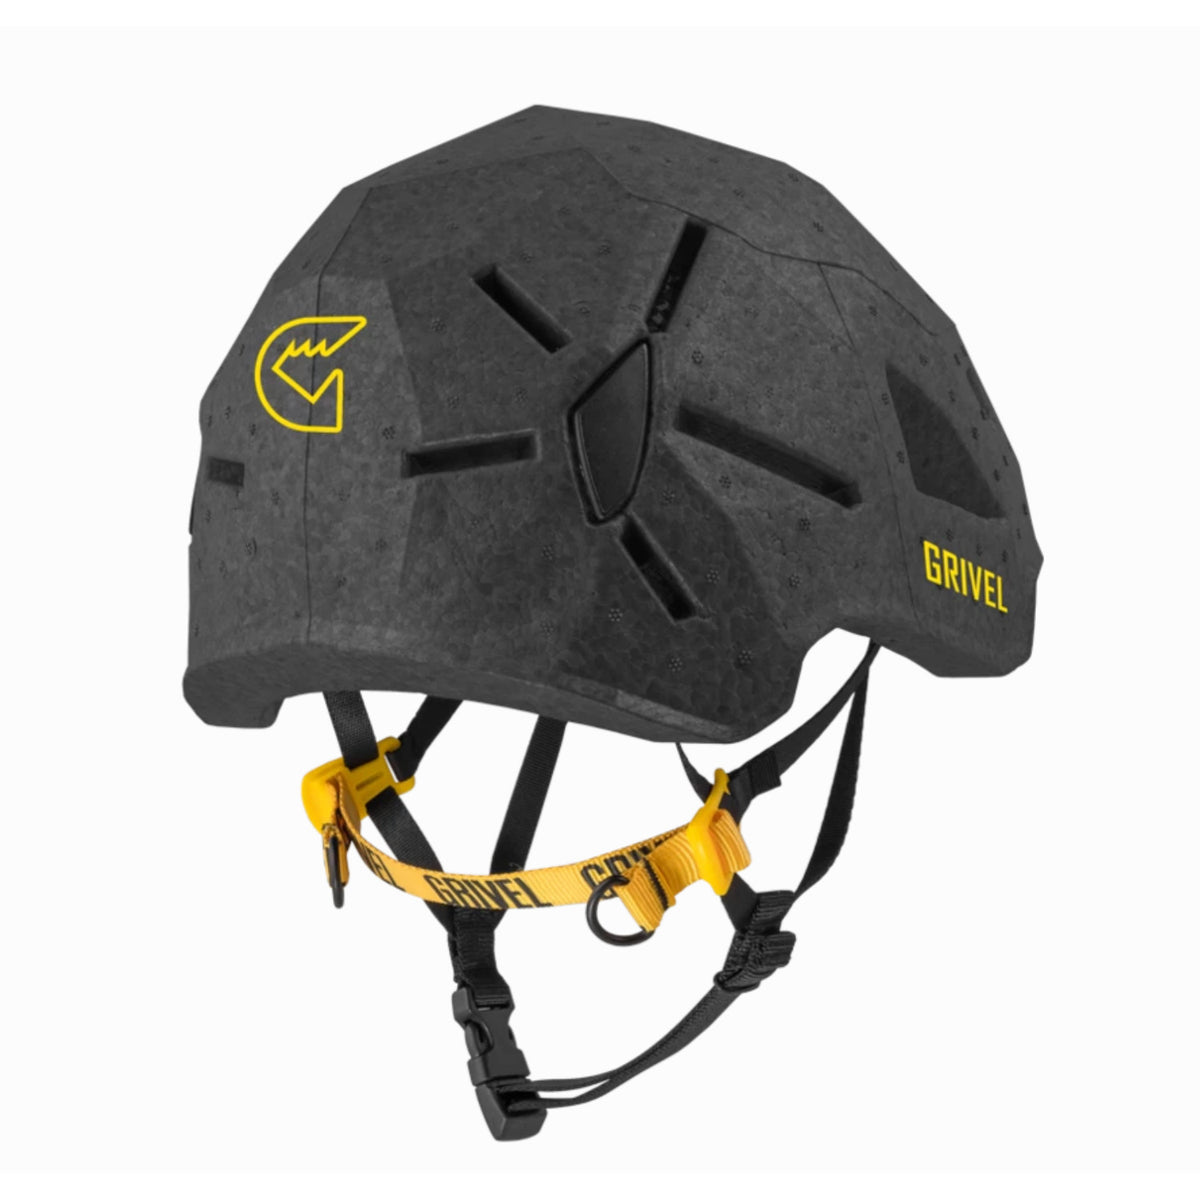 Grivel Duetto climbing and skiing helmet, rear/side view in black colour